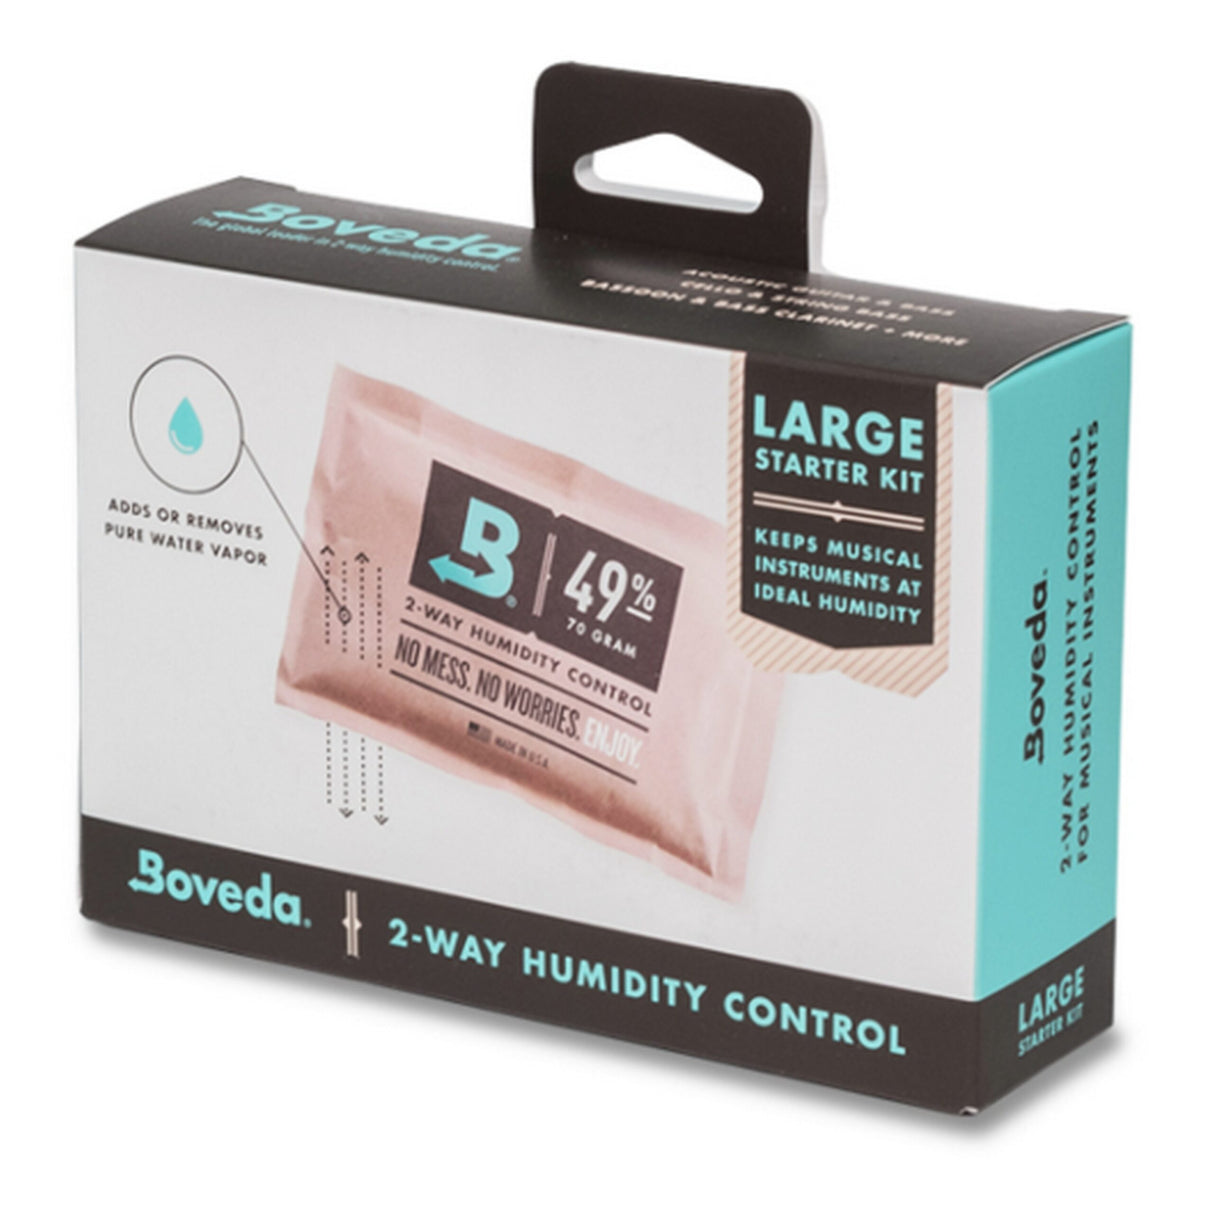 Boveda BVMFK-LG Starter Kit Humidity Control for Instruments, Large